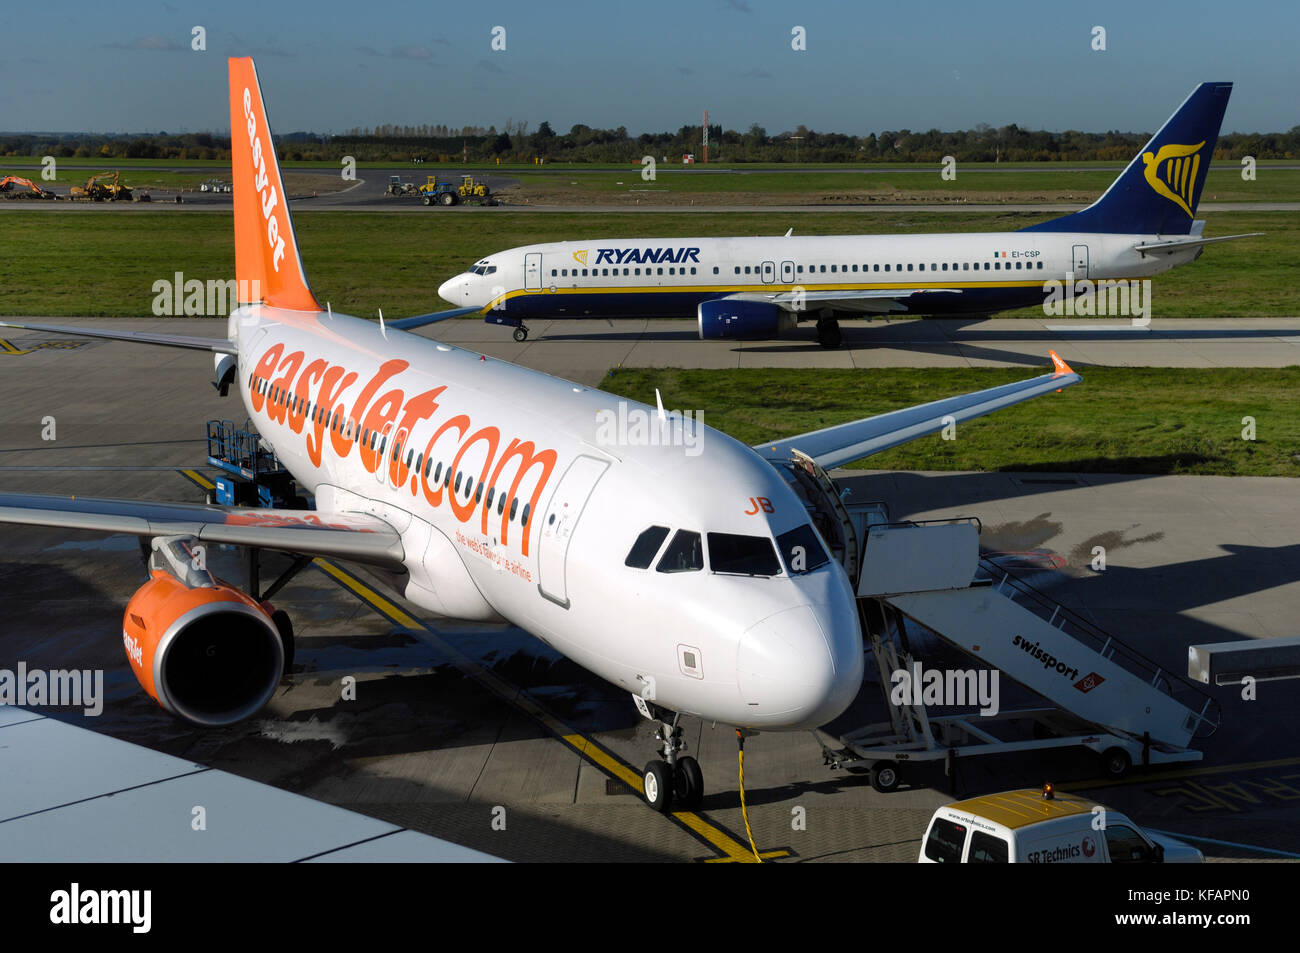 an easyJet Airbus A319-100 with Ryanair Boeing 737-800 taxiing and diggers and construction vehicles behind Stock Photo